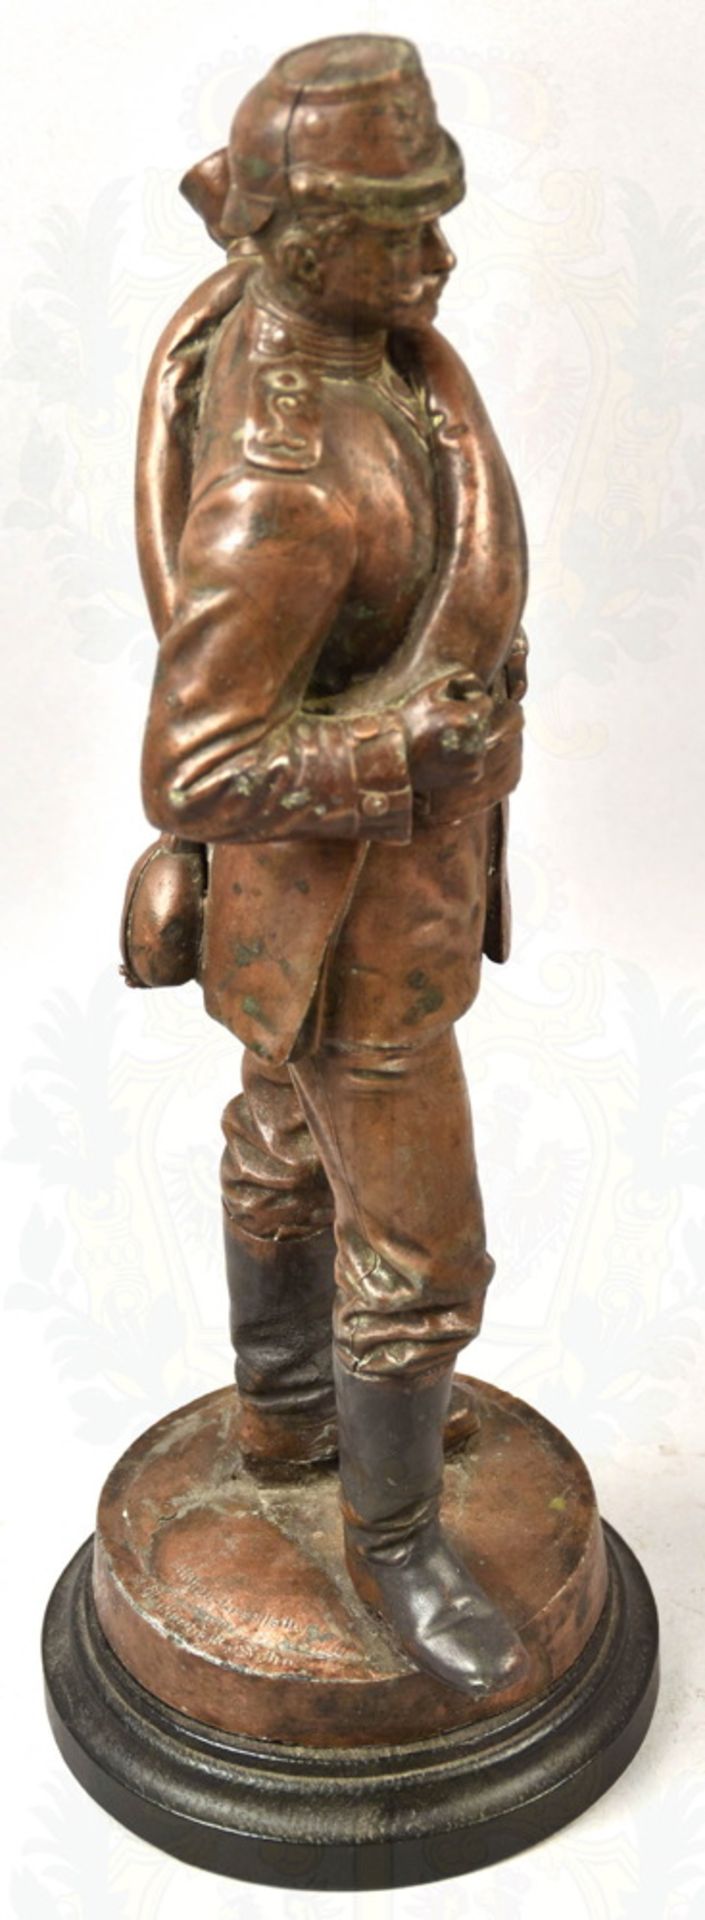 Statuette of a crew member Airship Battalion No. 1 - Image 2 of 4